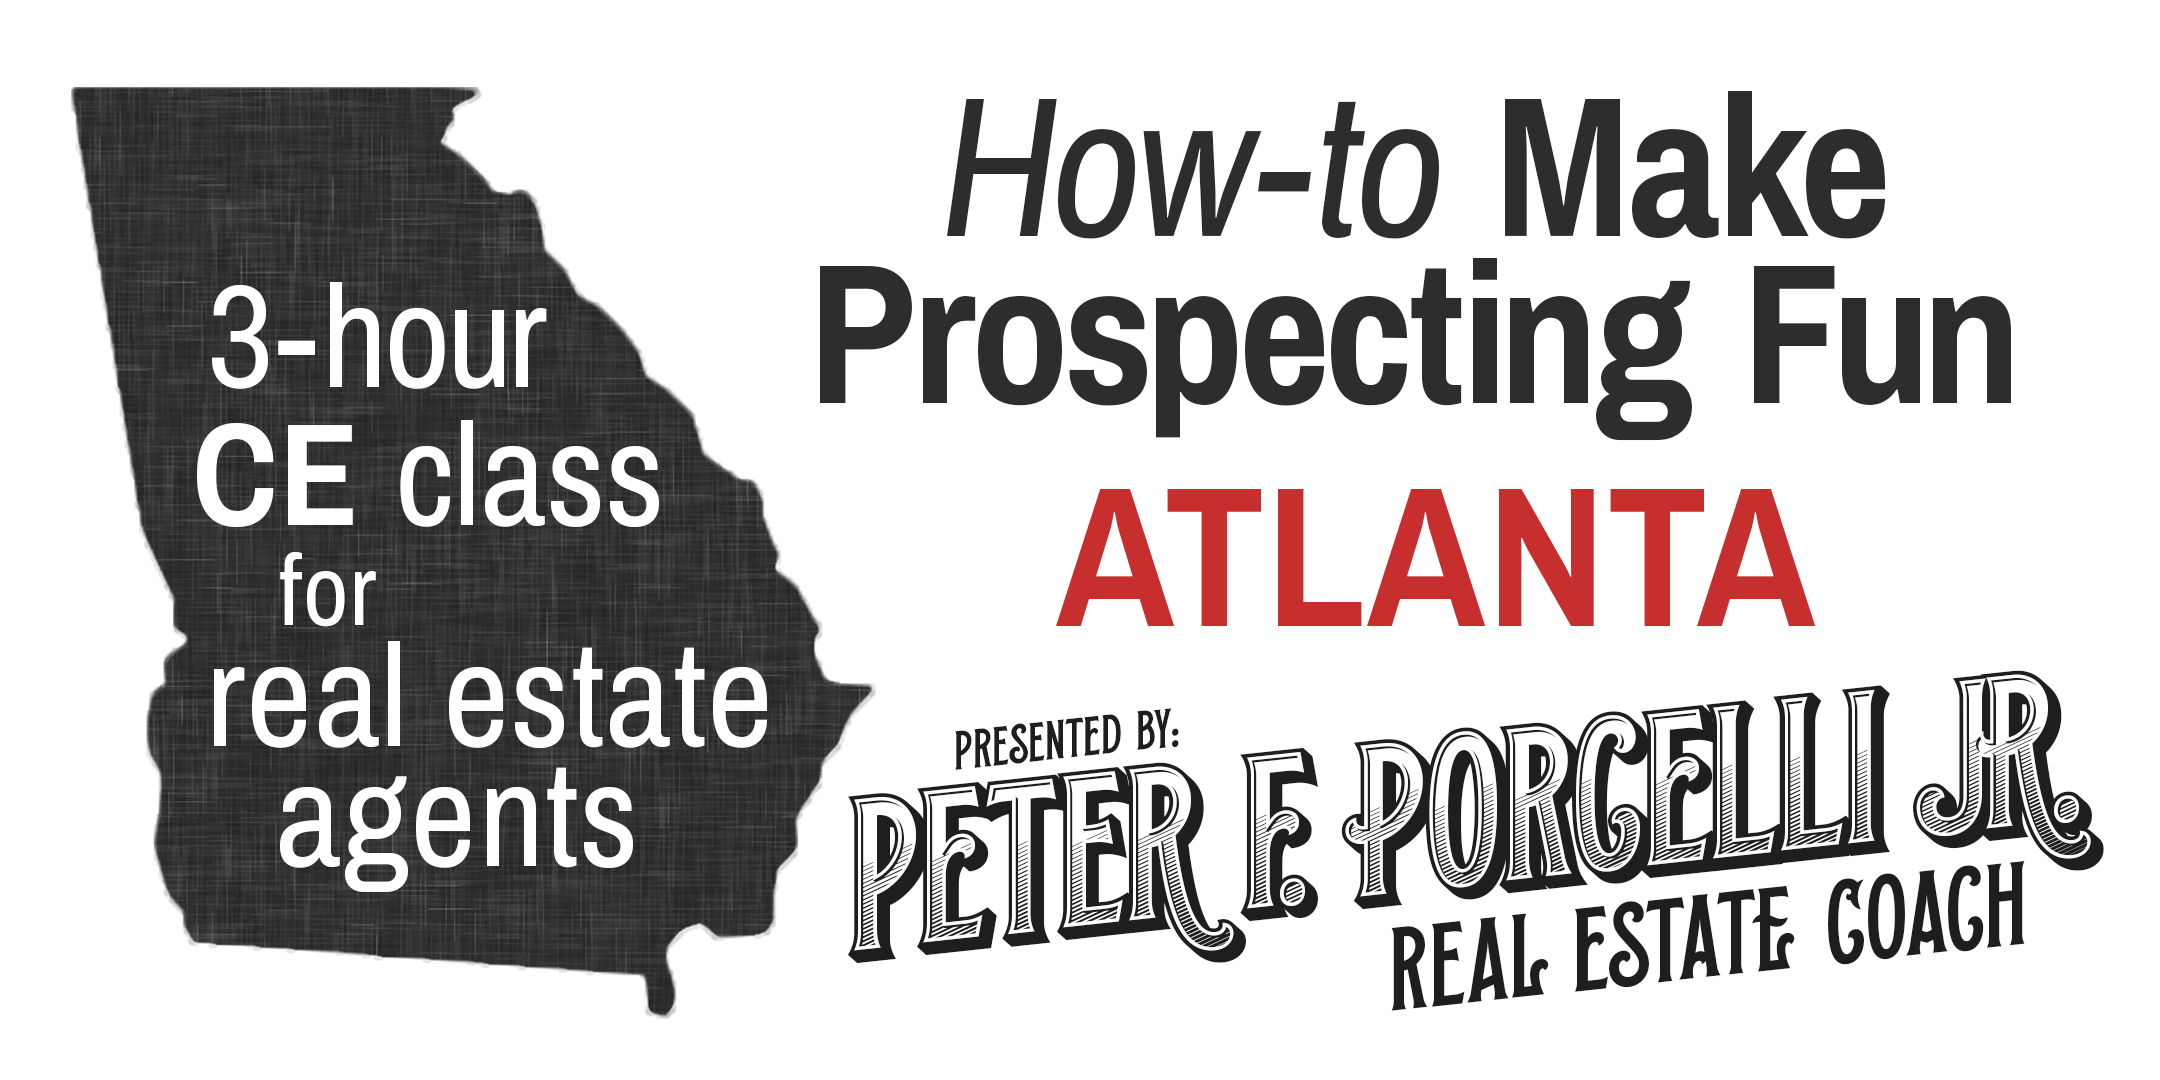 How-to Make Prospecting Fun; 3 hrs. CE class for real estate agents ATLANTA